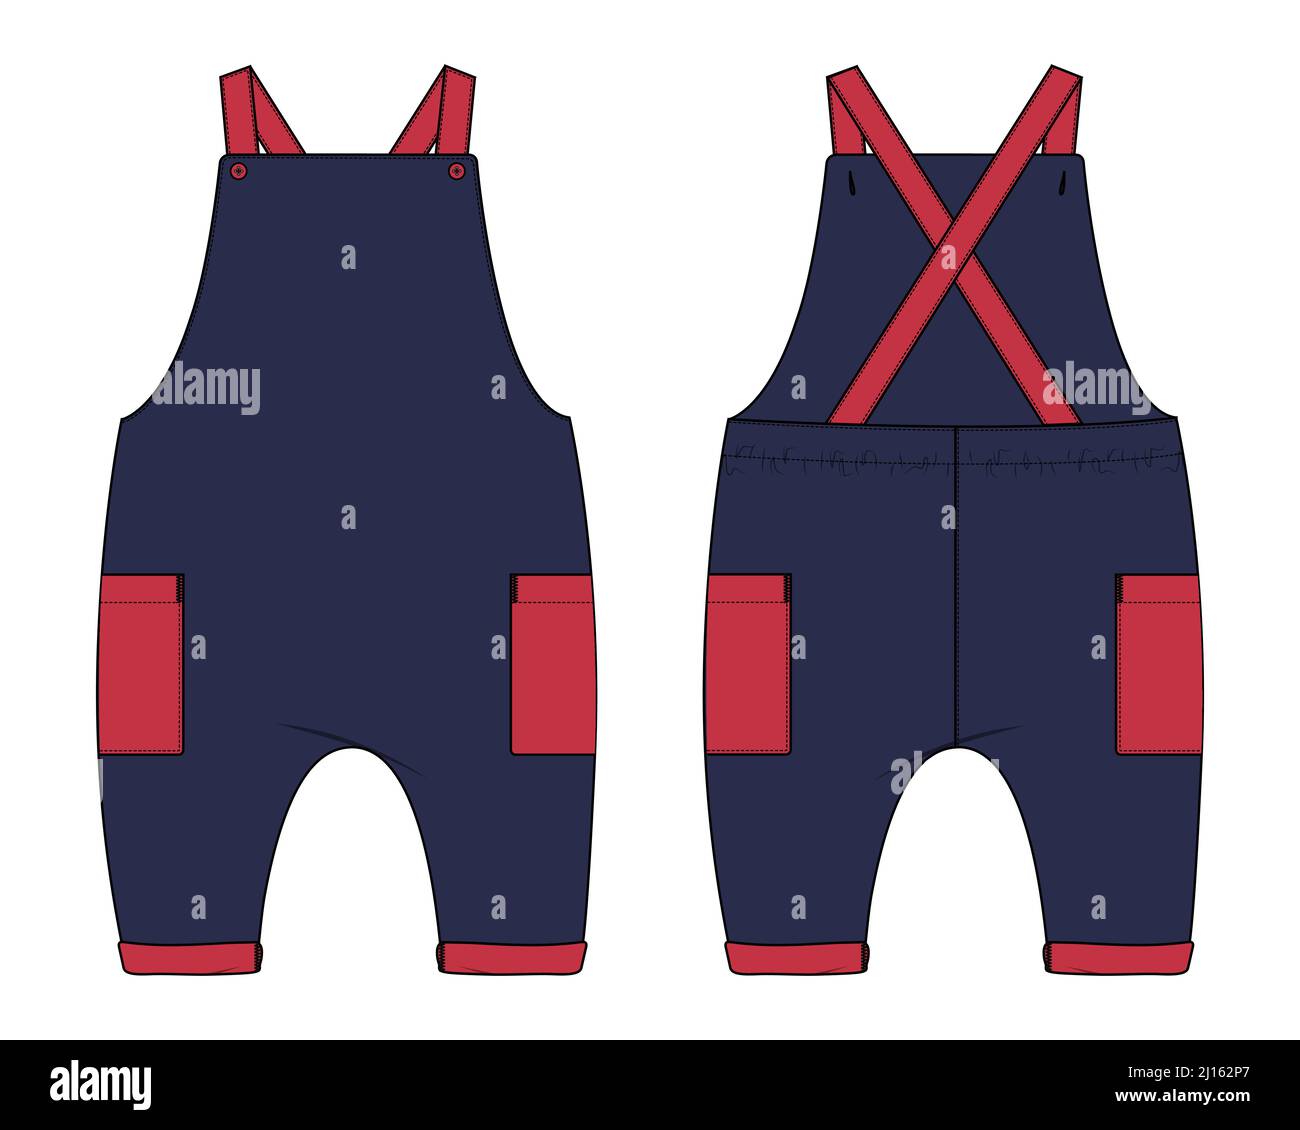 Kids Dungaree Dress design Fashion flat Sketch vector Illustration Template Front And back views. Apparel Clothing Design mock up Front And Back Views Stock Vector